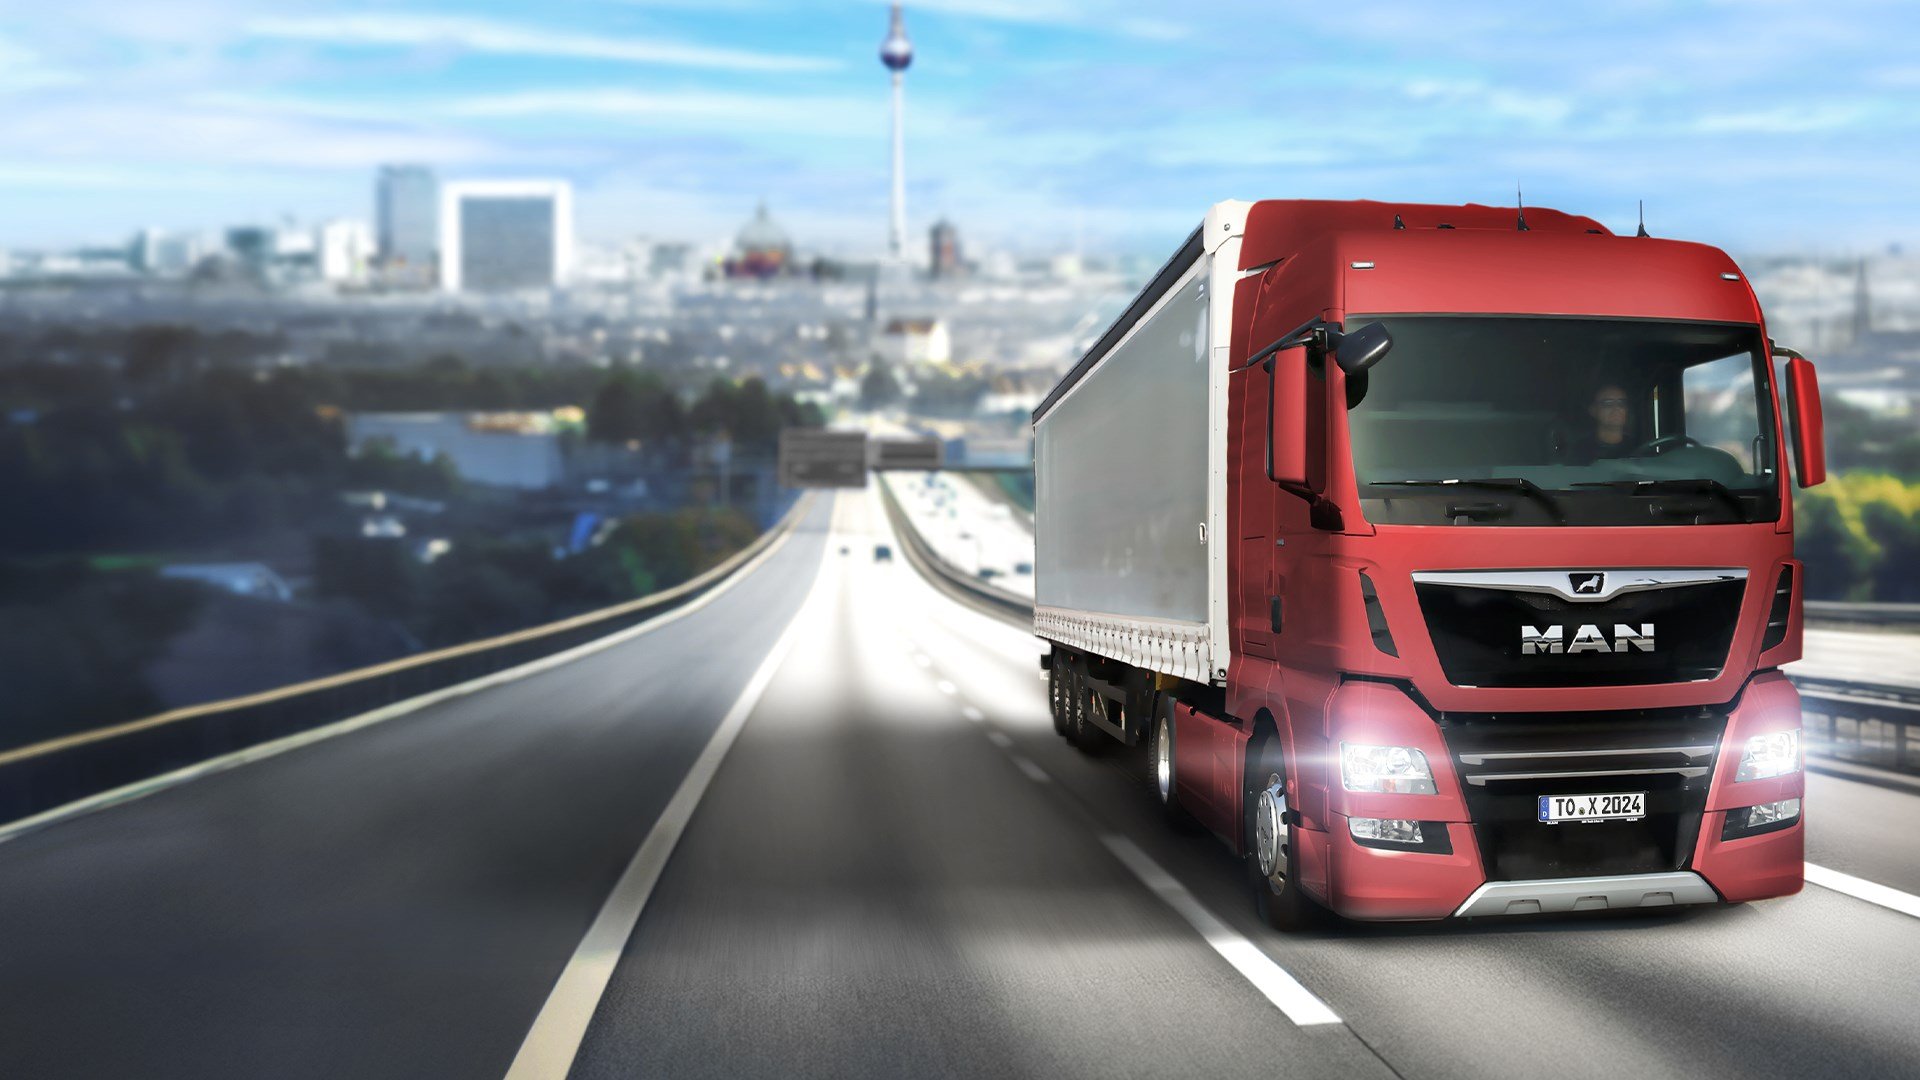 On The Road - The Truck Simulator cover image